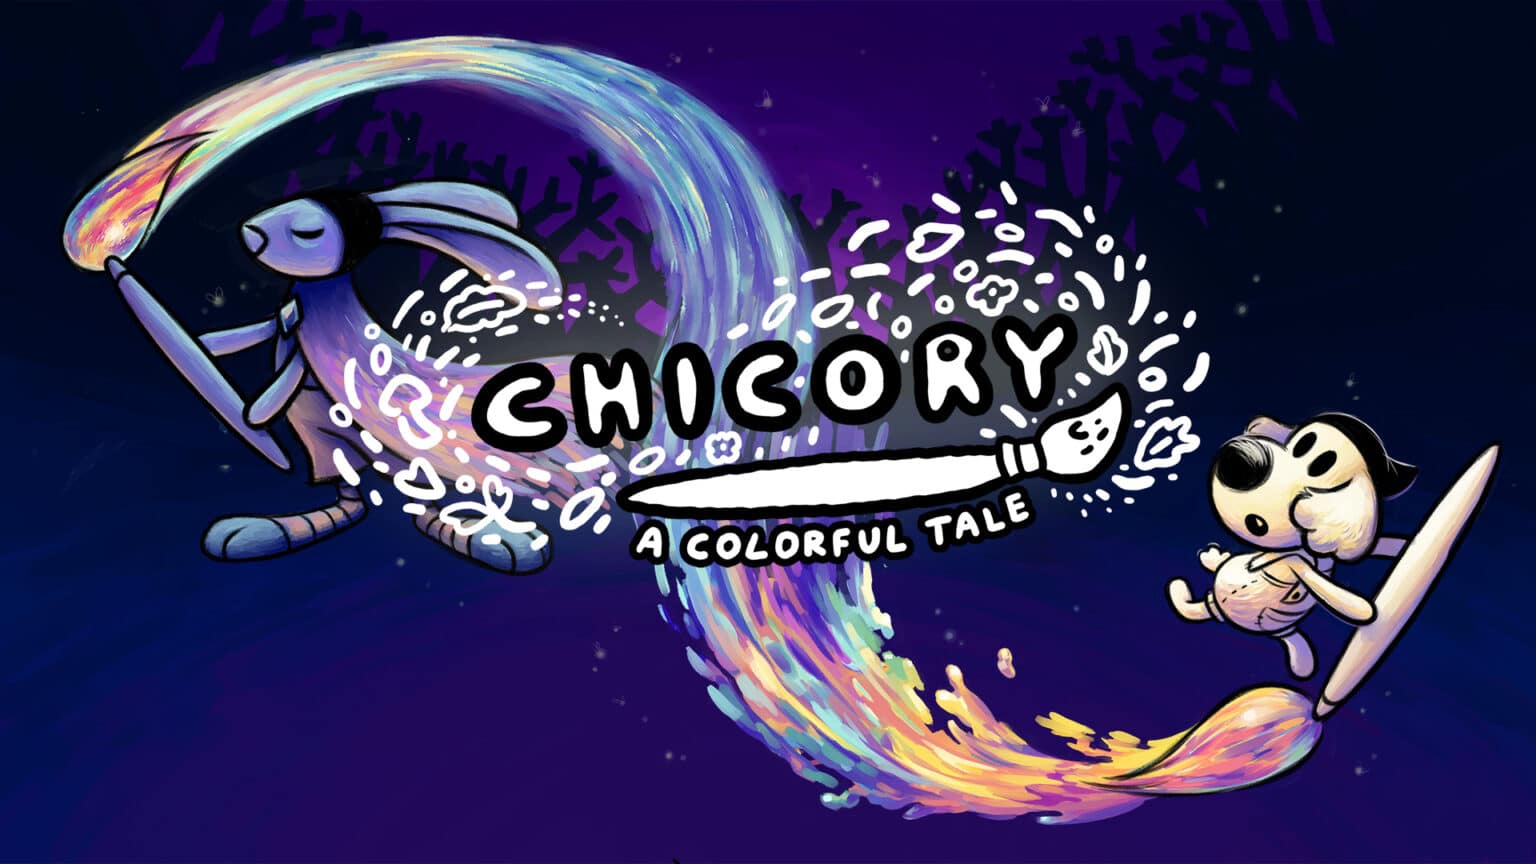 chicory a colorful tale full map